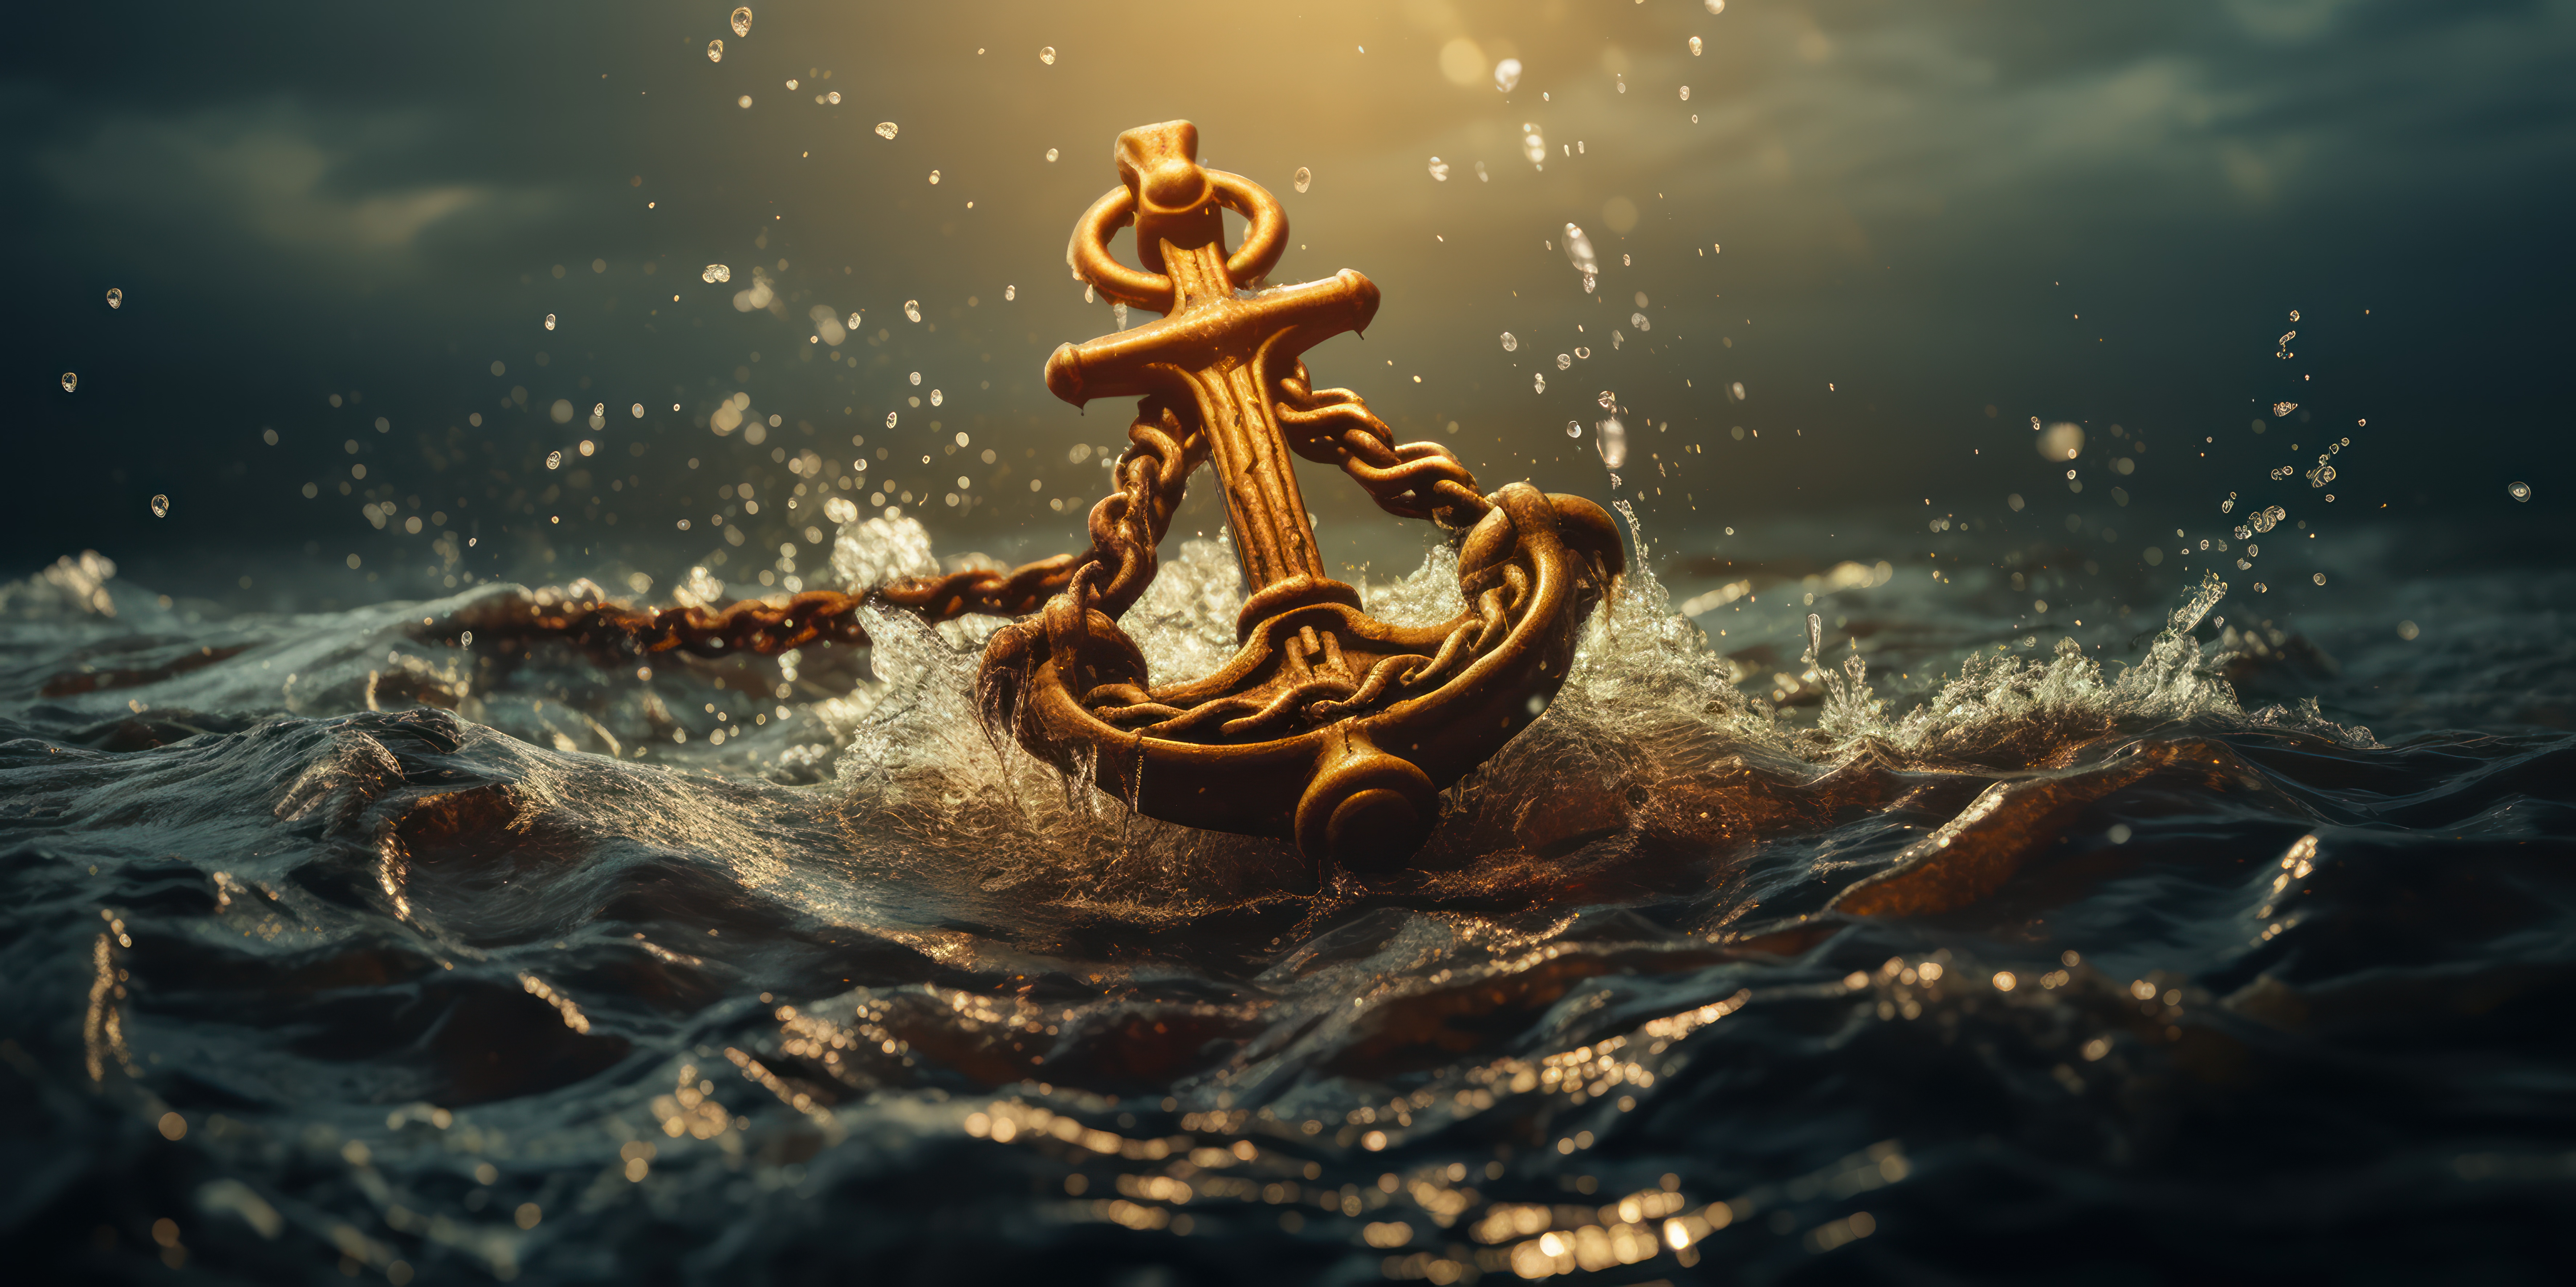 bold-golden-anchor-hangs-suspended-turbulent-silver-waves.jpg